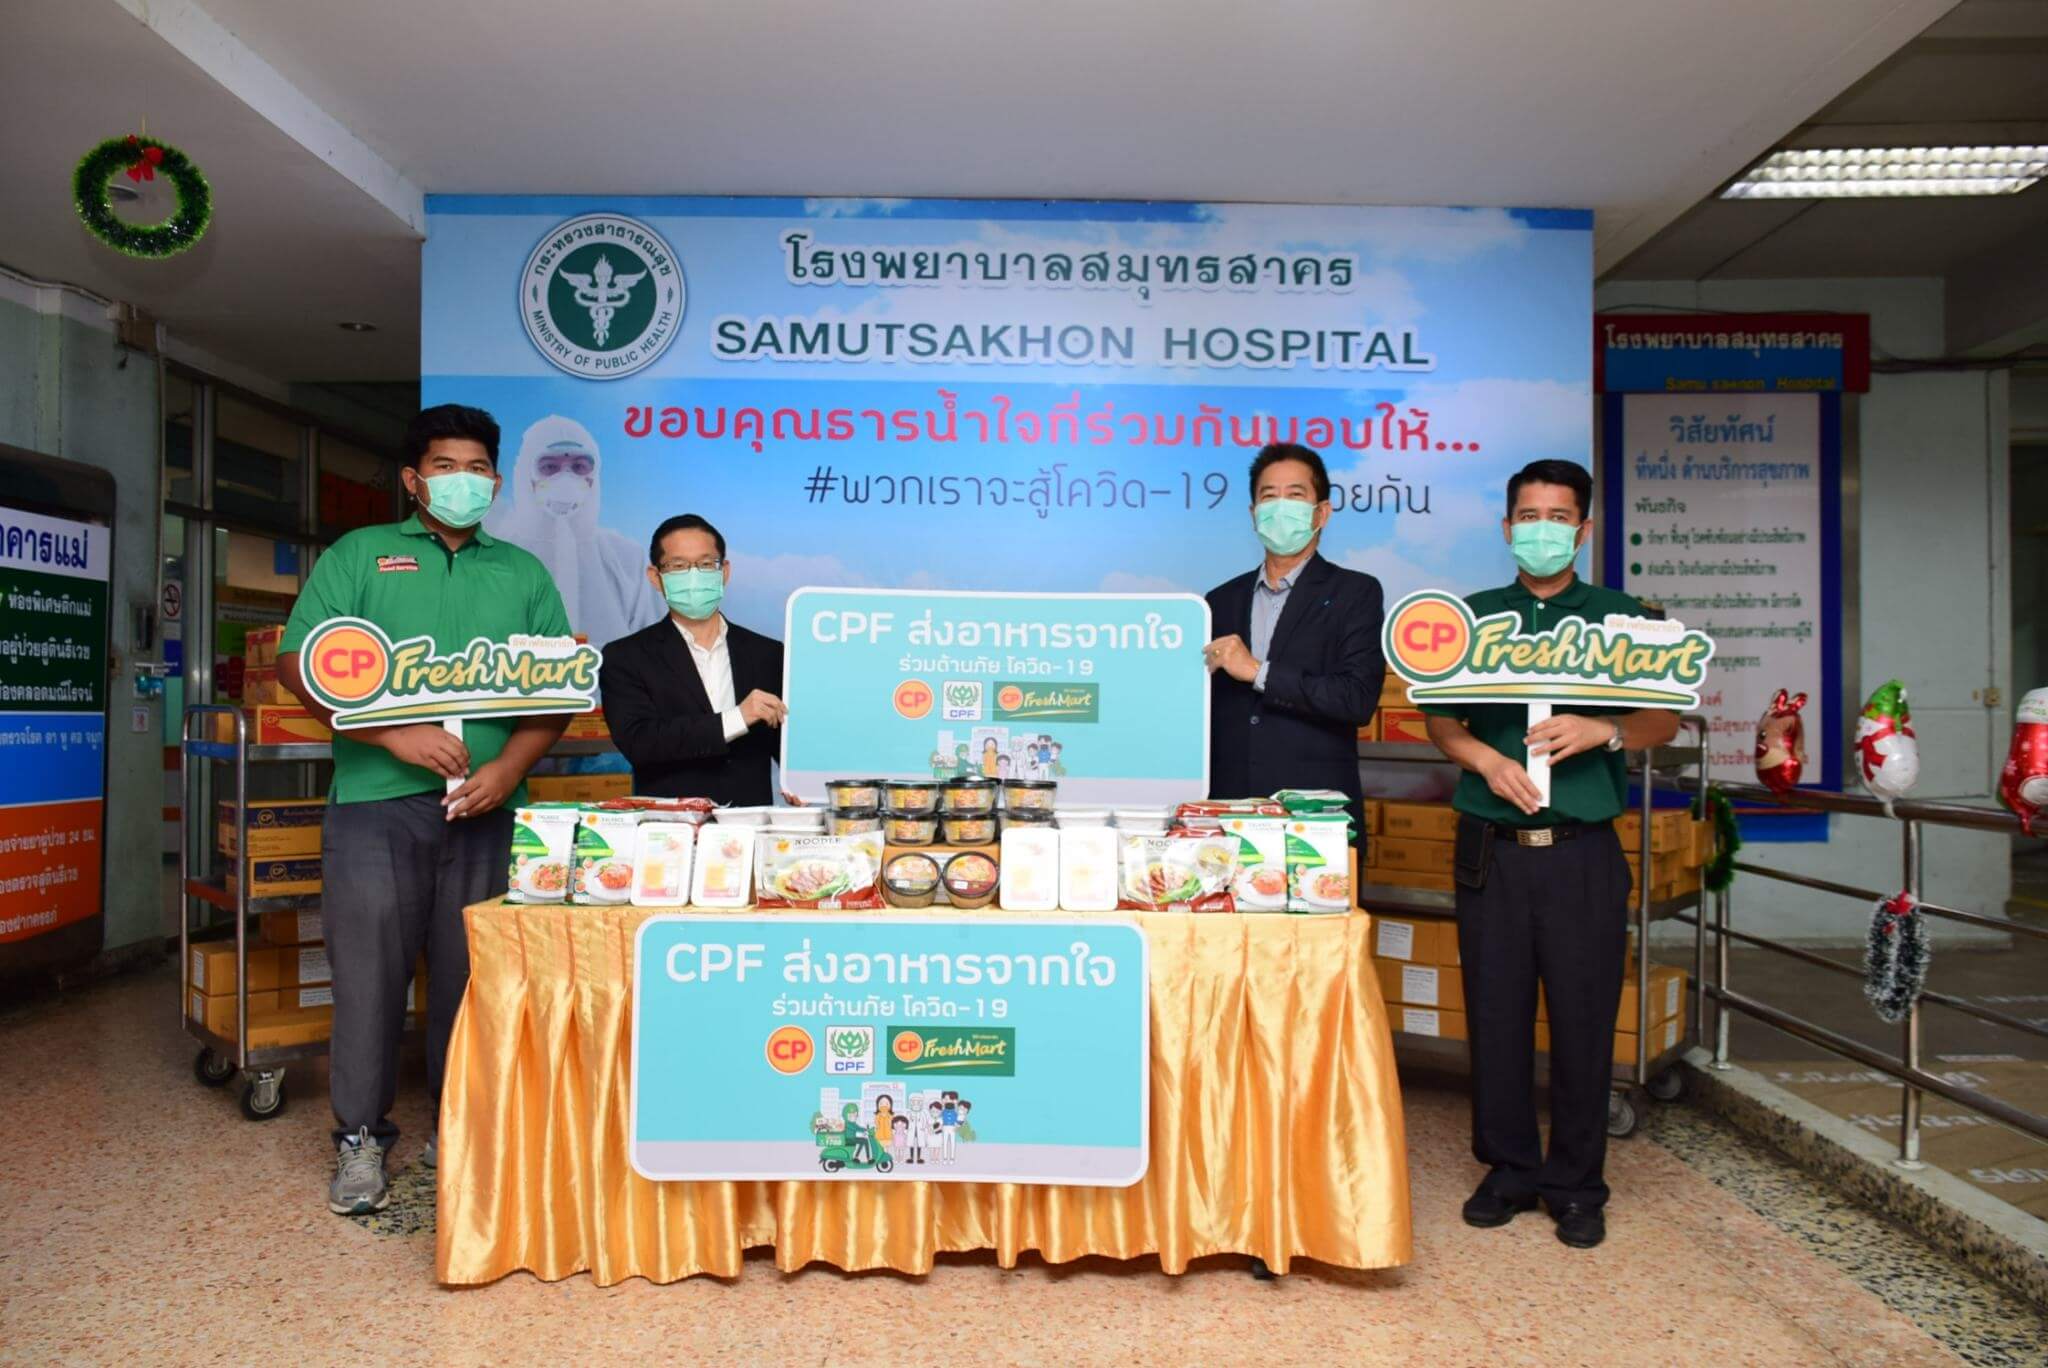 “CPF Food from heart against COVID-19” project, donated 55,000 pack of ready meals to frontline workers